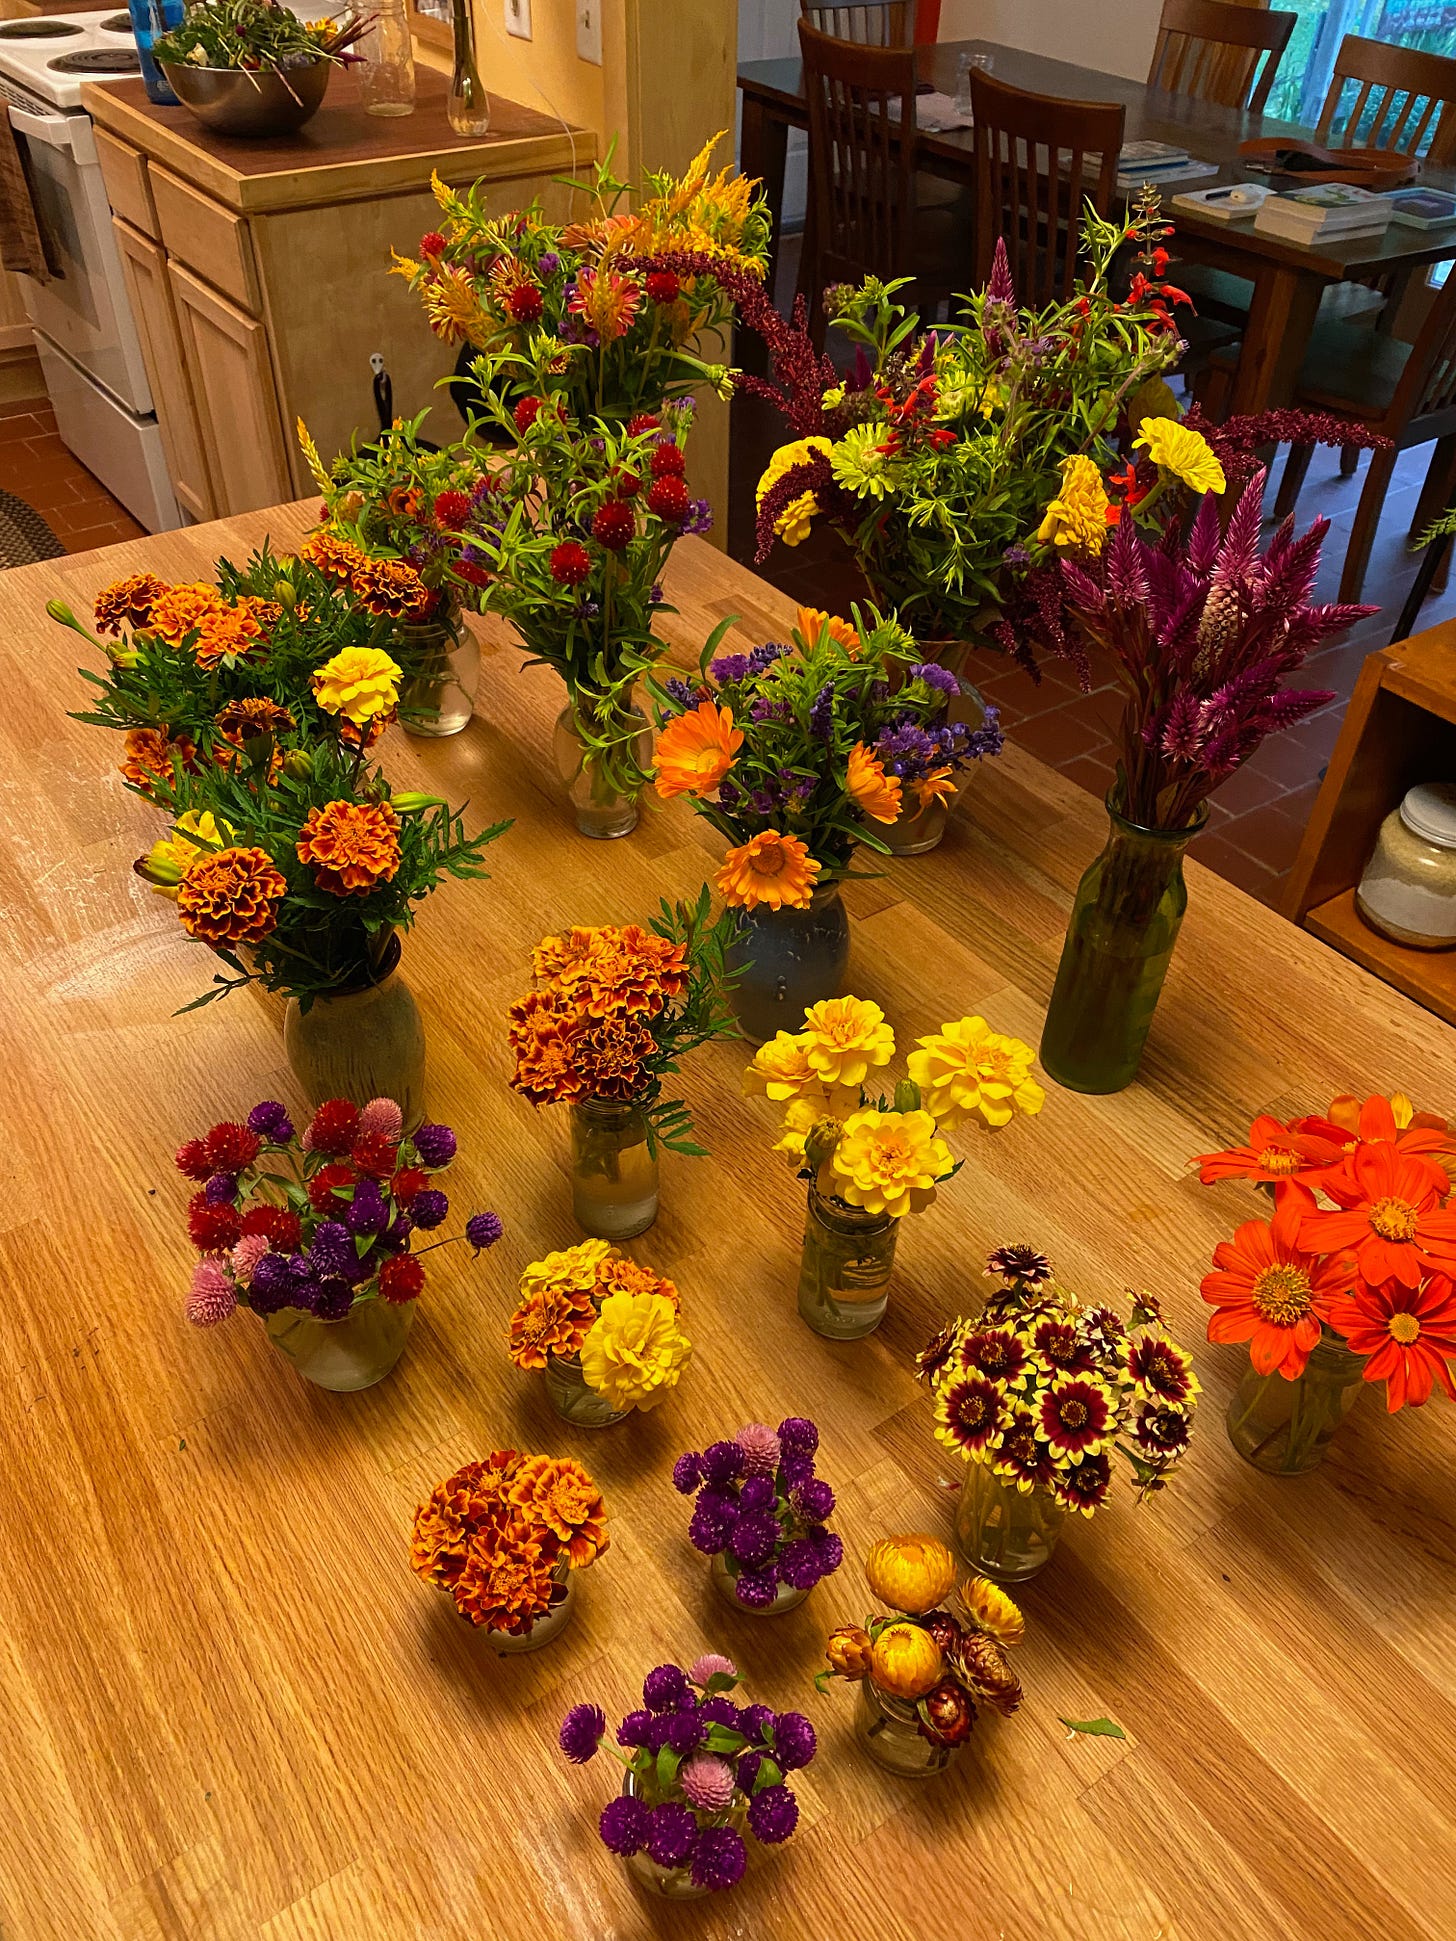 View of a kitchen island filled with vases of flowers. There are several small glass jars of yellow and orange marigolds, pink and red gomphrena, Mexican sunflowers, and zinnias. There are also several larger vases with mixed bouquets, mostly in shades of red, yellow, orange, purple, and pink.